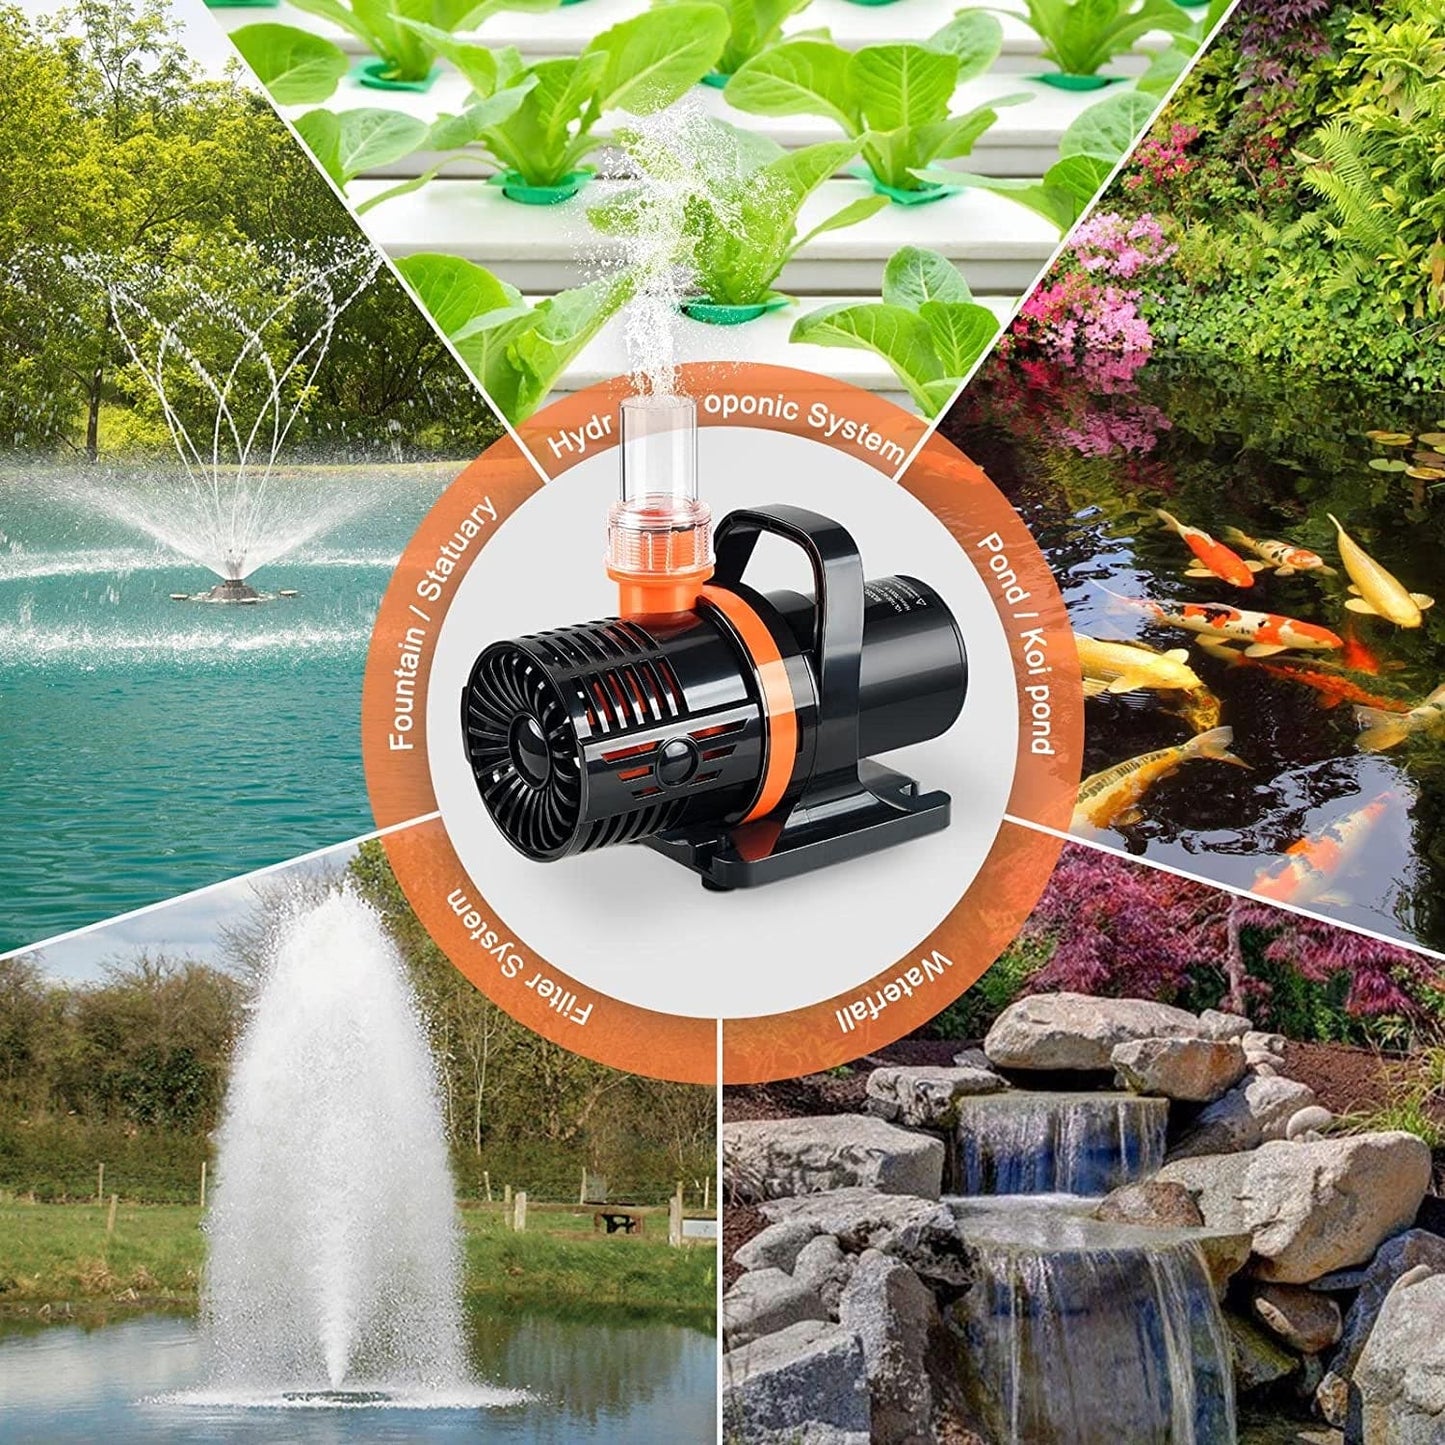 3400GPH Pond Pump,Submersible Water Pump,High Lift Waterfall Pump,With Barrier Bag, Used as Fountain Pump Outdoor,For Koi Pond Statuary Aquarium 22FT Max Lift 140W